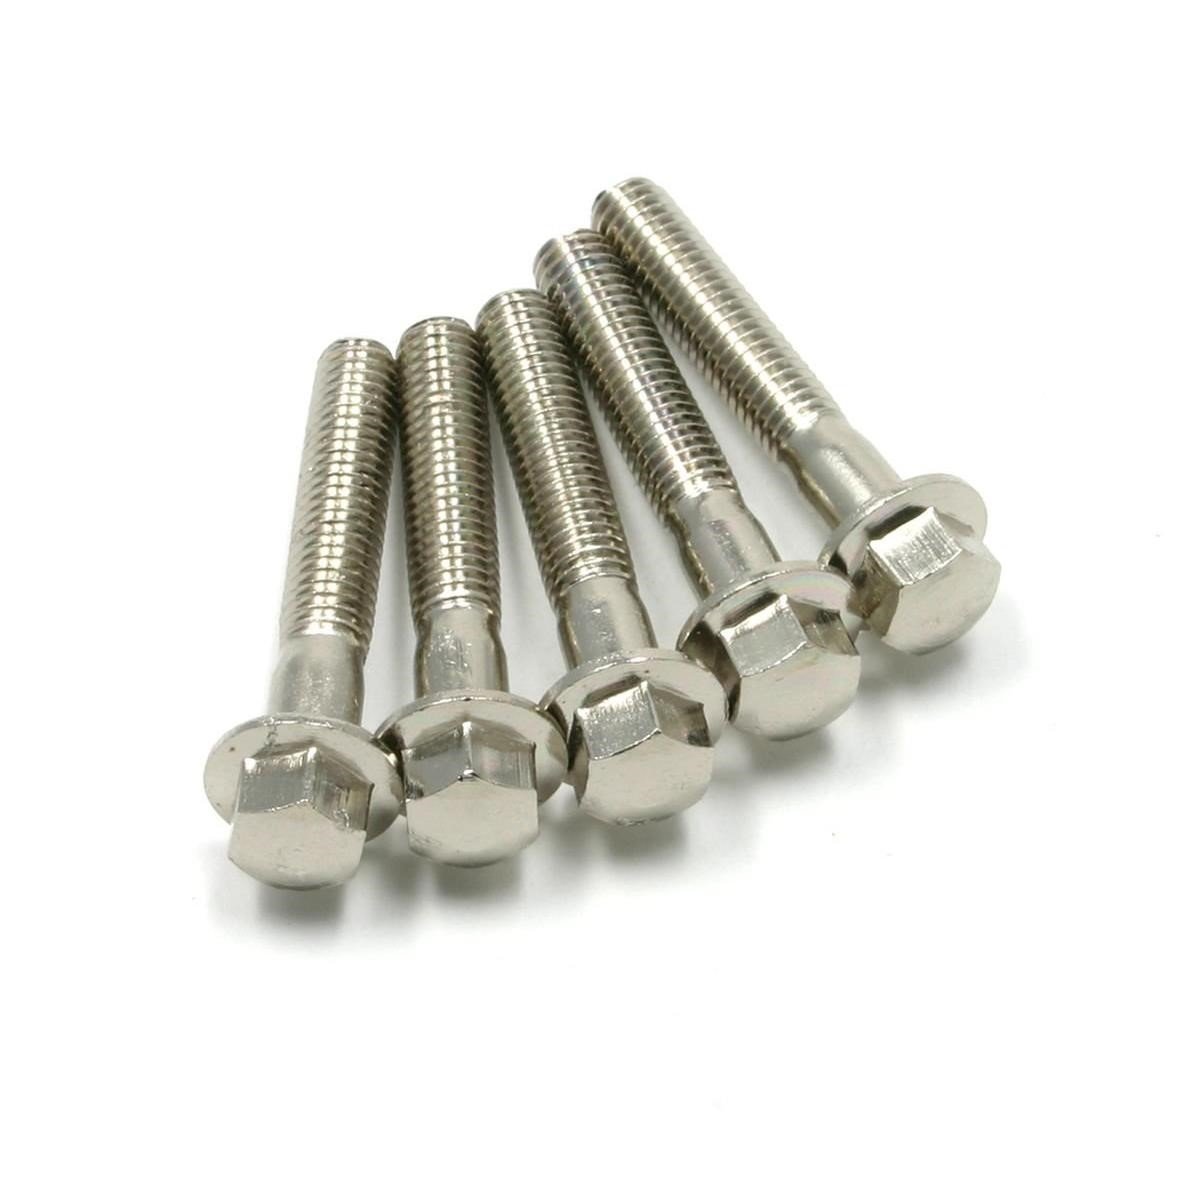 DRC Stainless Steel Bolts  M6 x 20 mm, 5-Pack